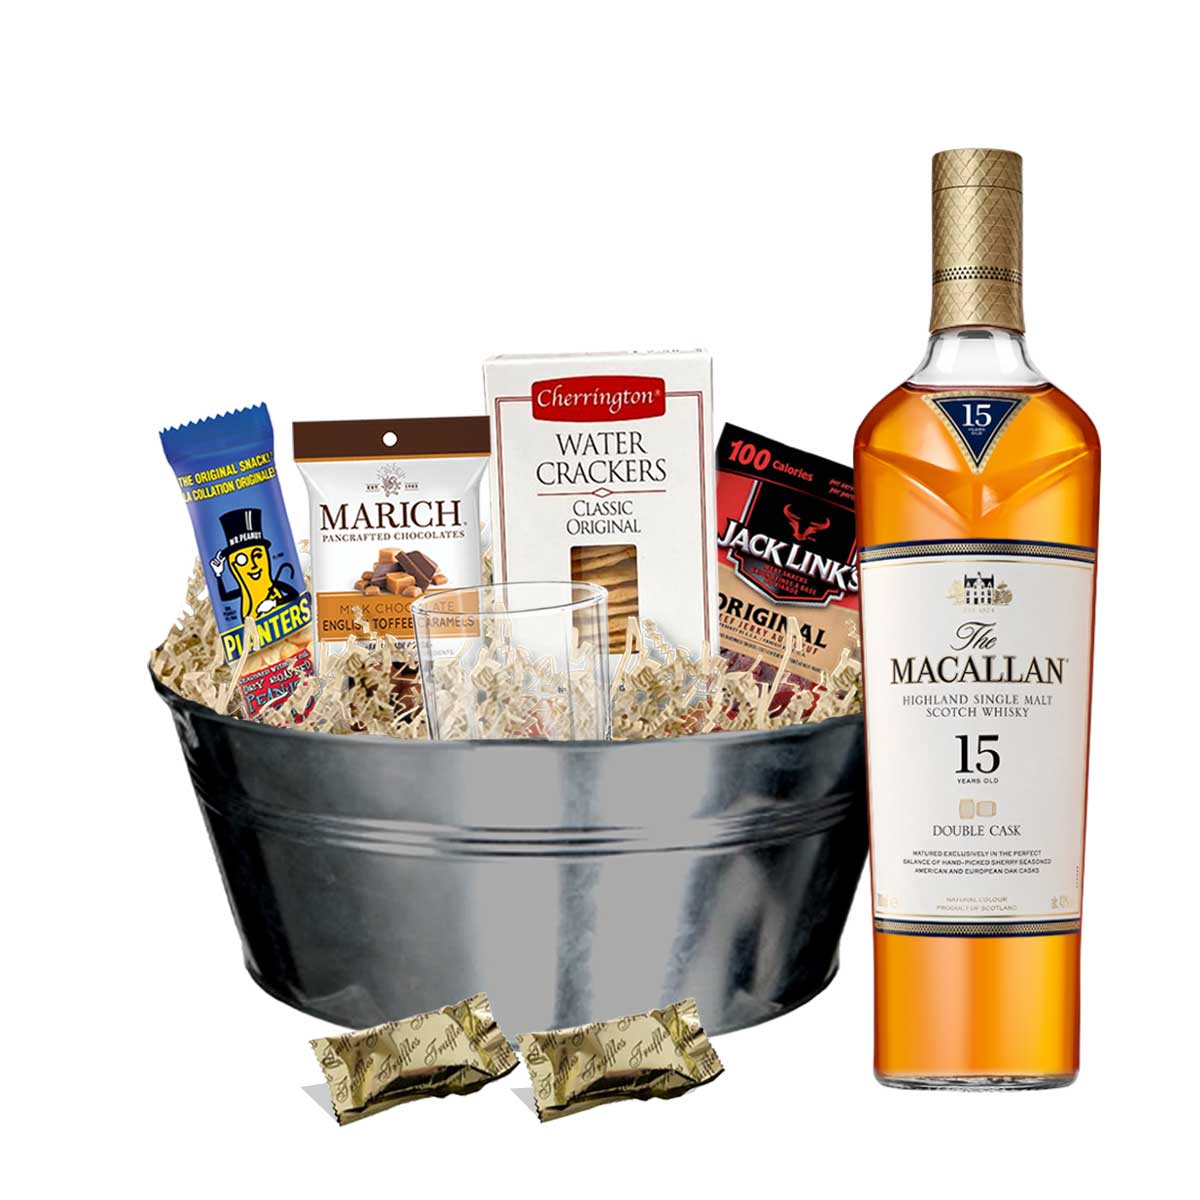 TAG Liquor Stores BC - Macallan 15 Years Old Double Cask Scotch Whisky 750ml Gift Basket